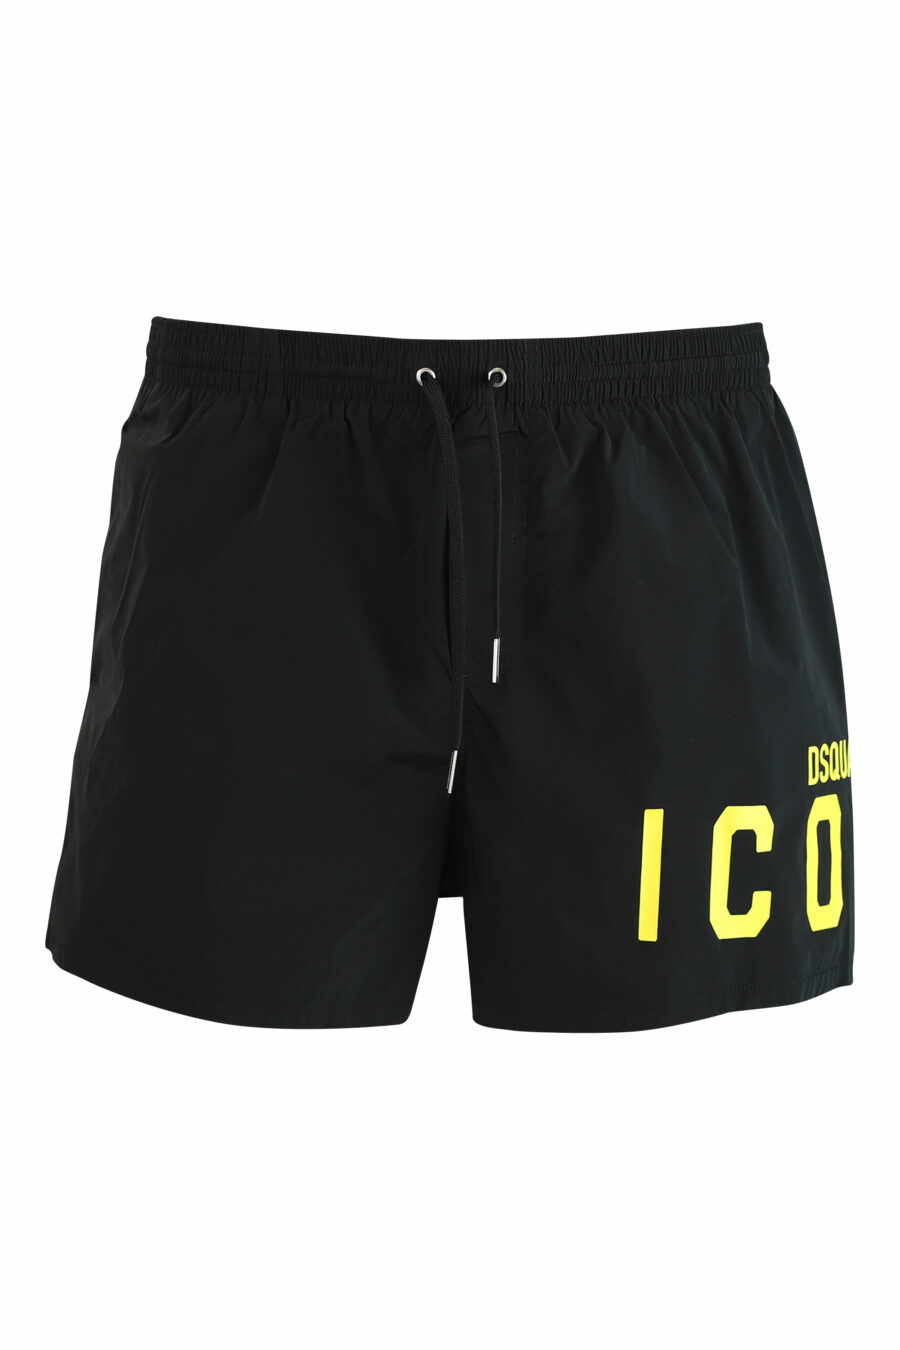 Black midi swimming costume with yellow "icon" logo on the side - IMG 1127